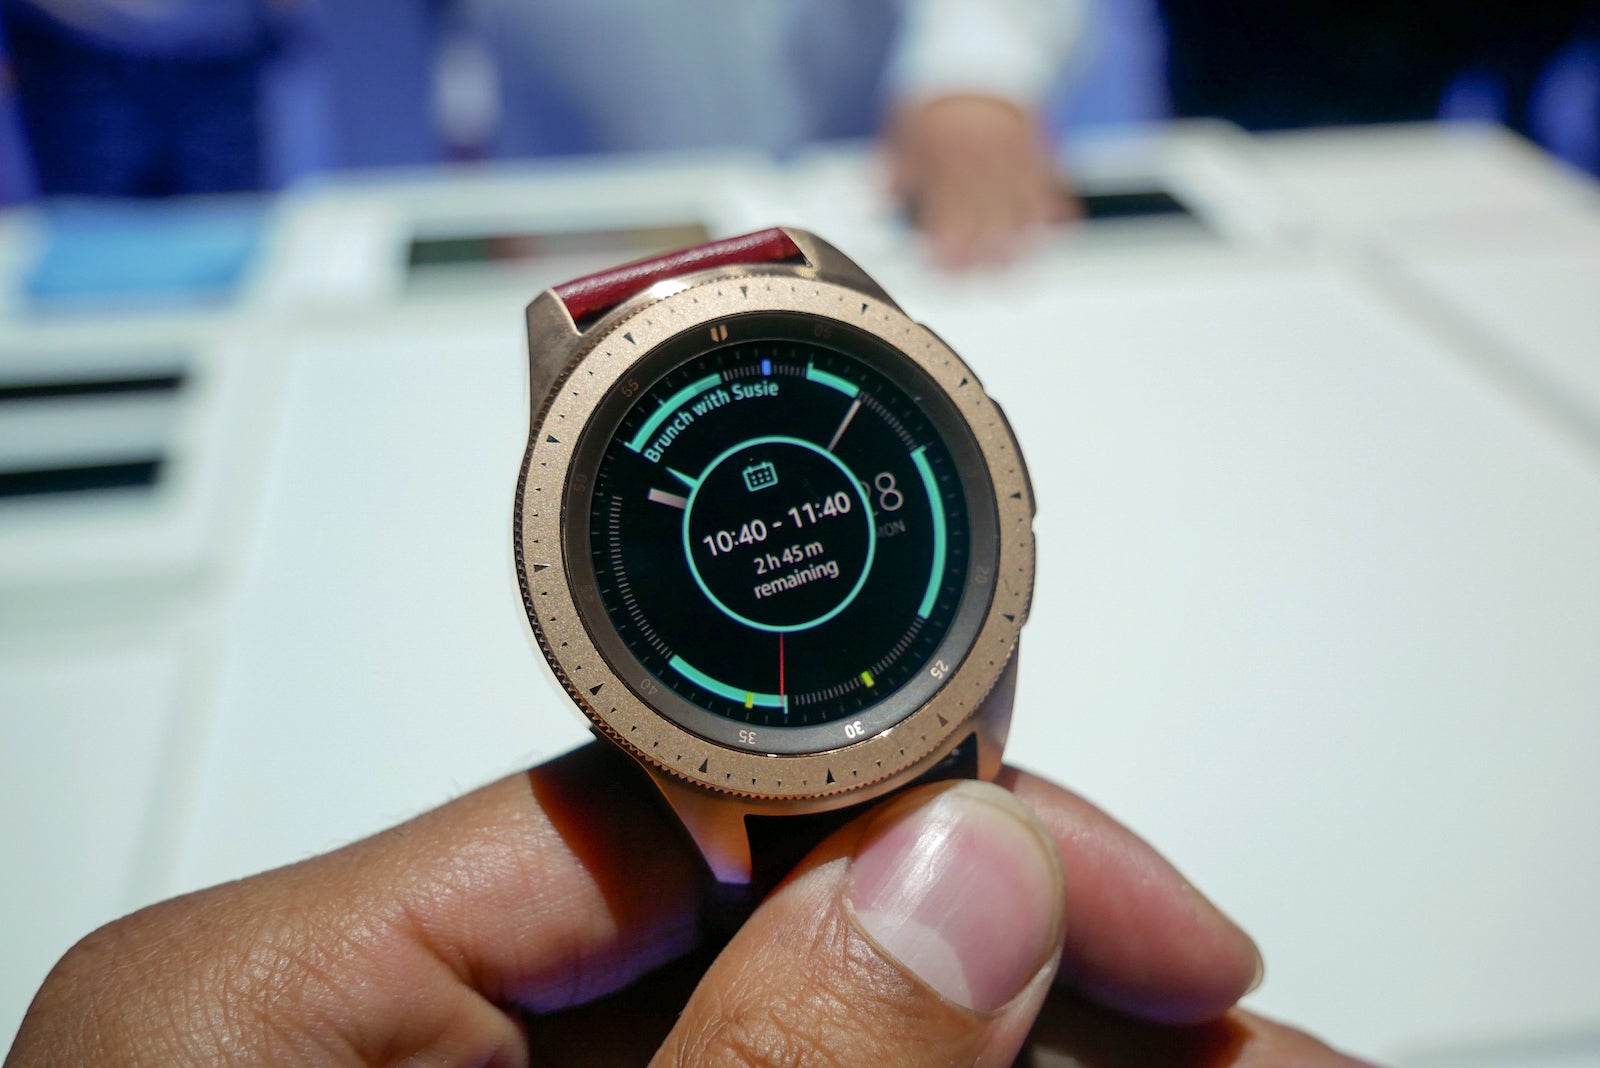 Samsung Galaxy Watch hands-on: The new standard in smartwatches?